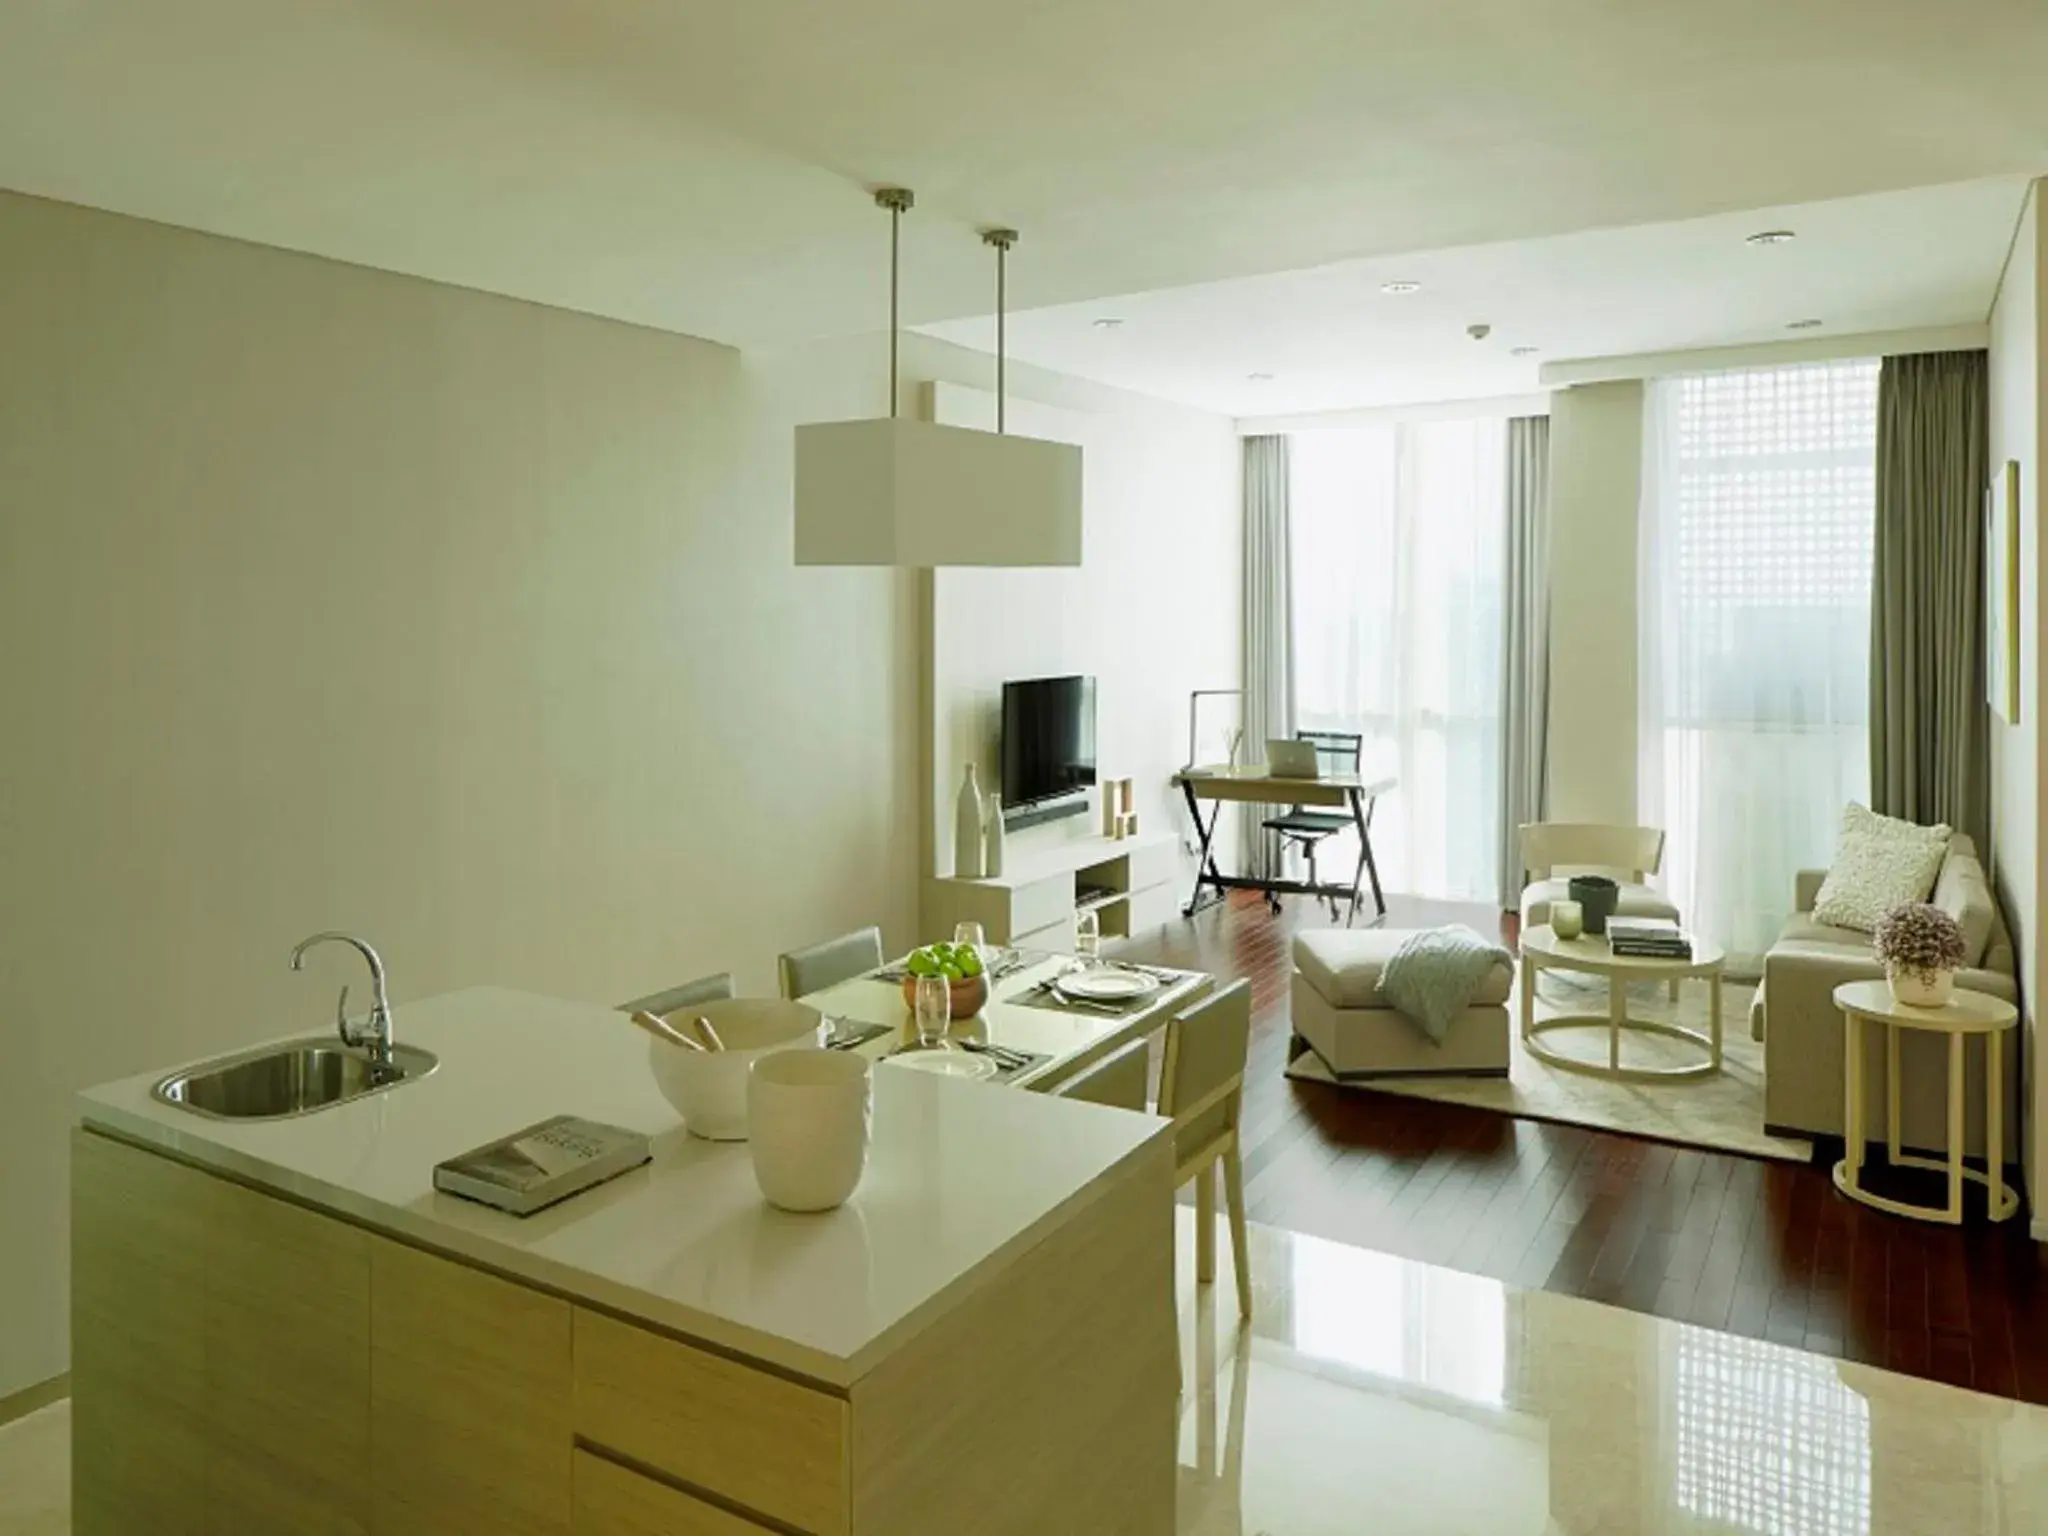 Executive Two-Bedroom Apartment in Fraser Residence Menteng Jakarta